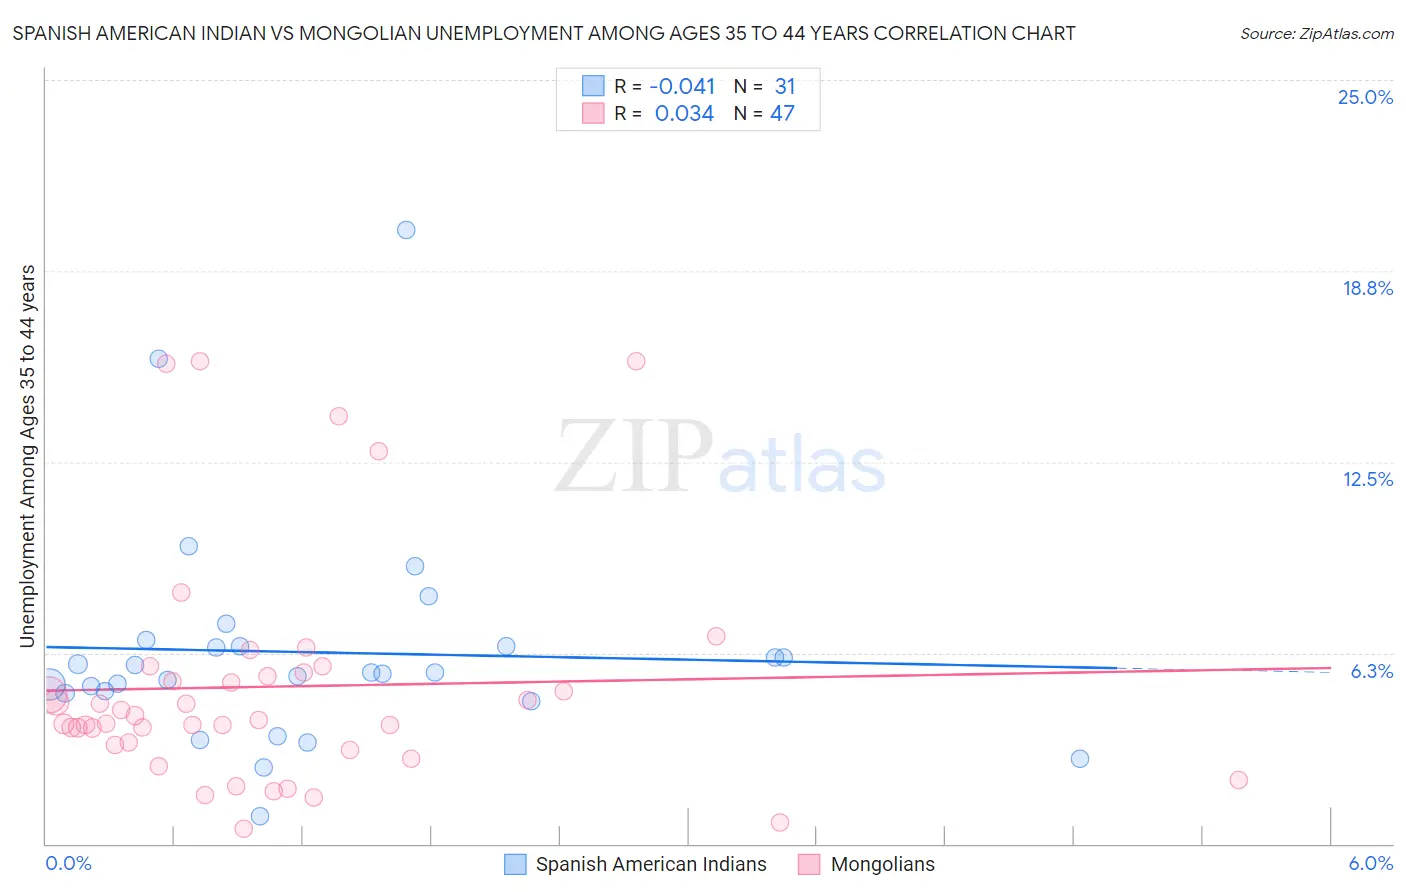 Spanish American Indian vs Mongolian Unemployment Among Ages 35 to 44 years